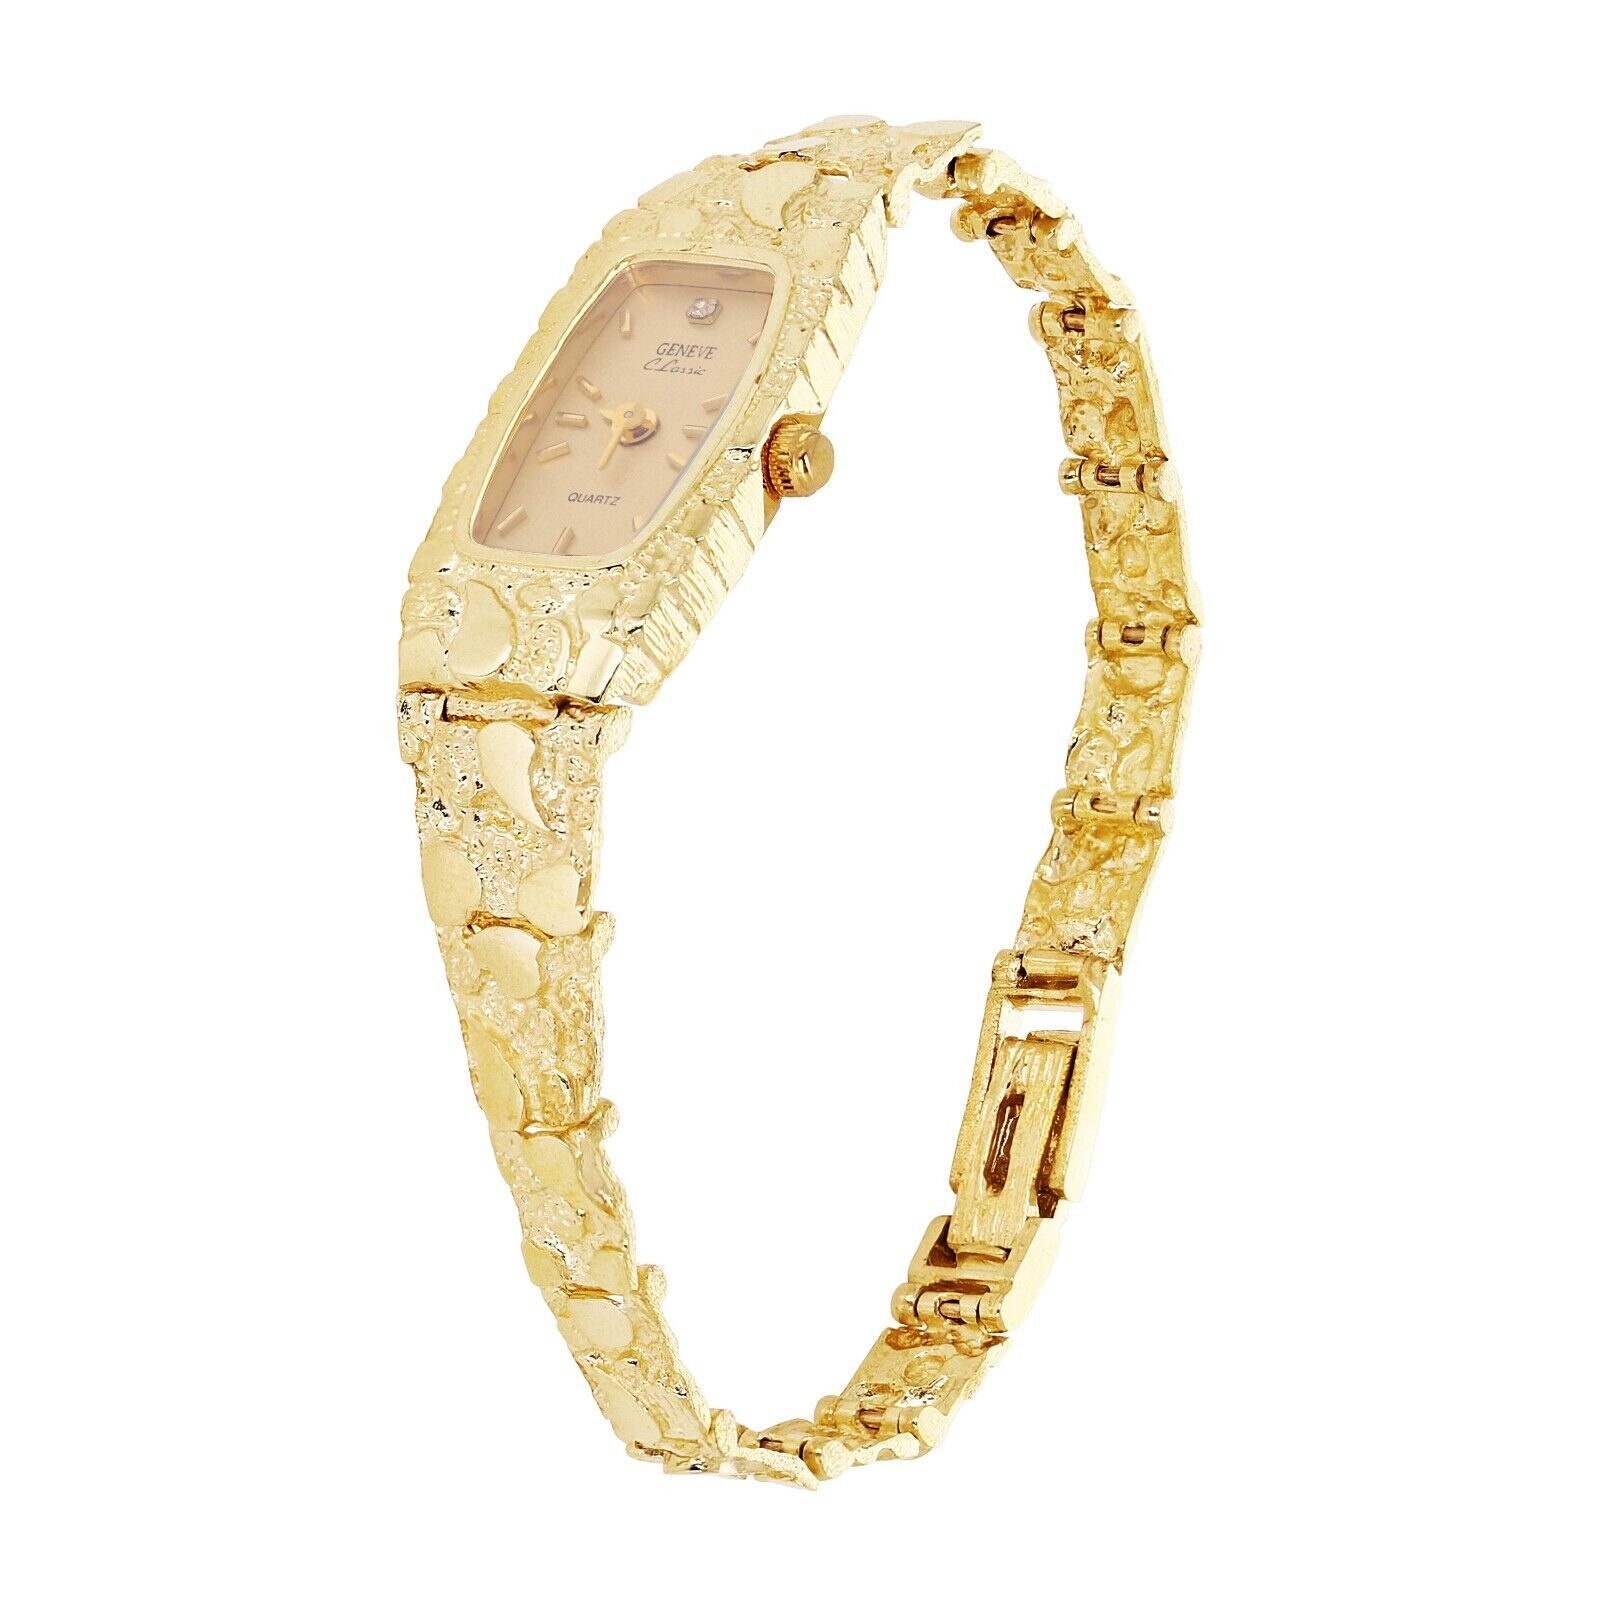 Women's 14k Yellow Gold Nugget Link Wrist Band with Geneve 